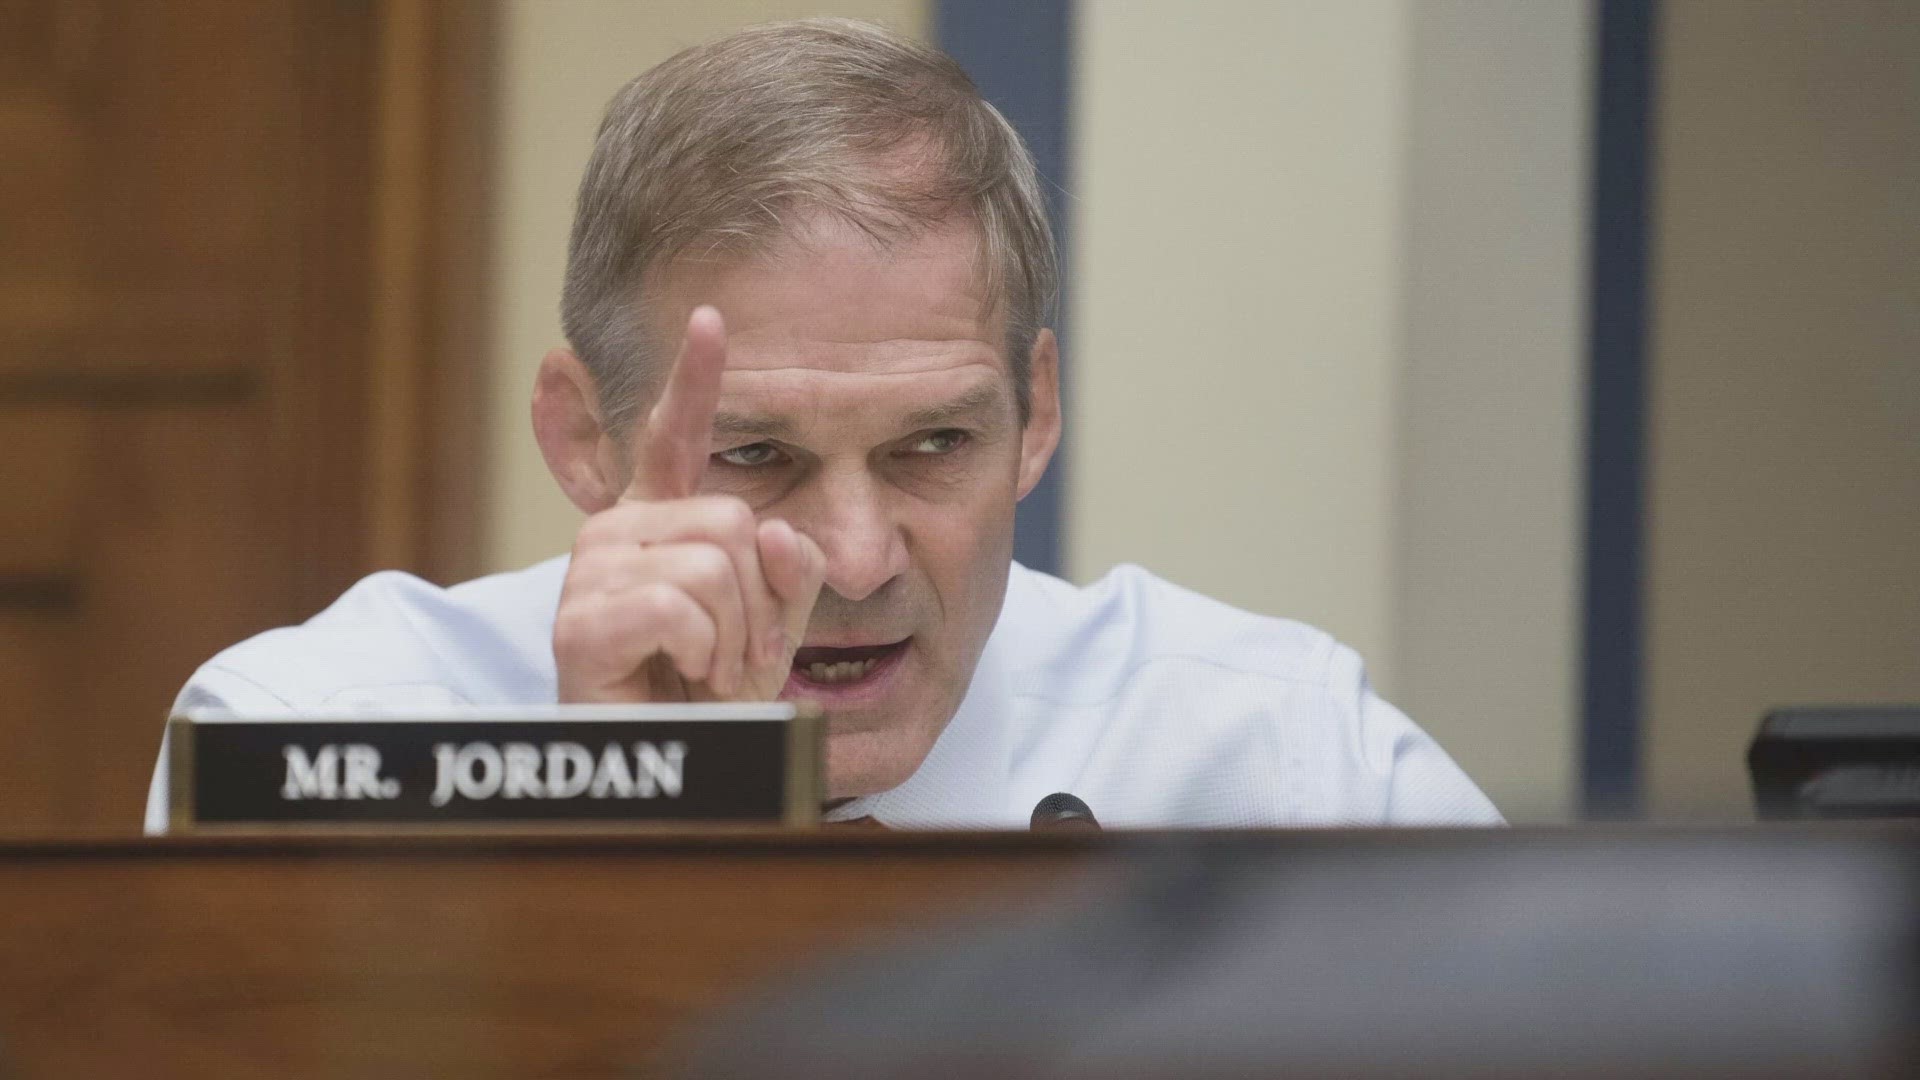 Rep. Jim Jordan is seeking to replace the ousted Rep. Kevin McCarthy as the speaker of the House.